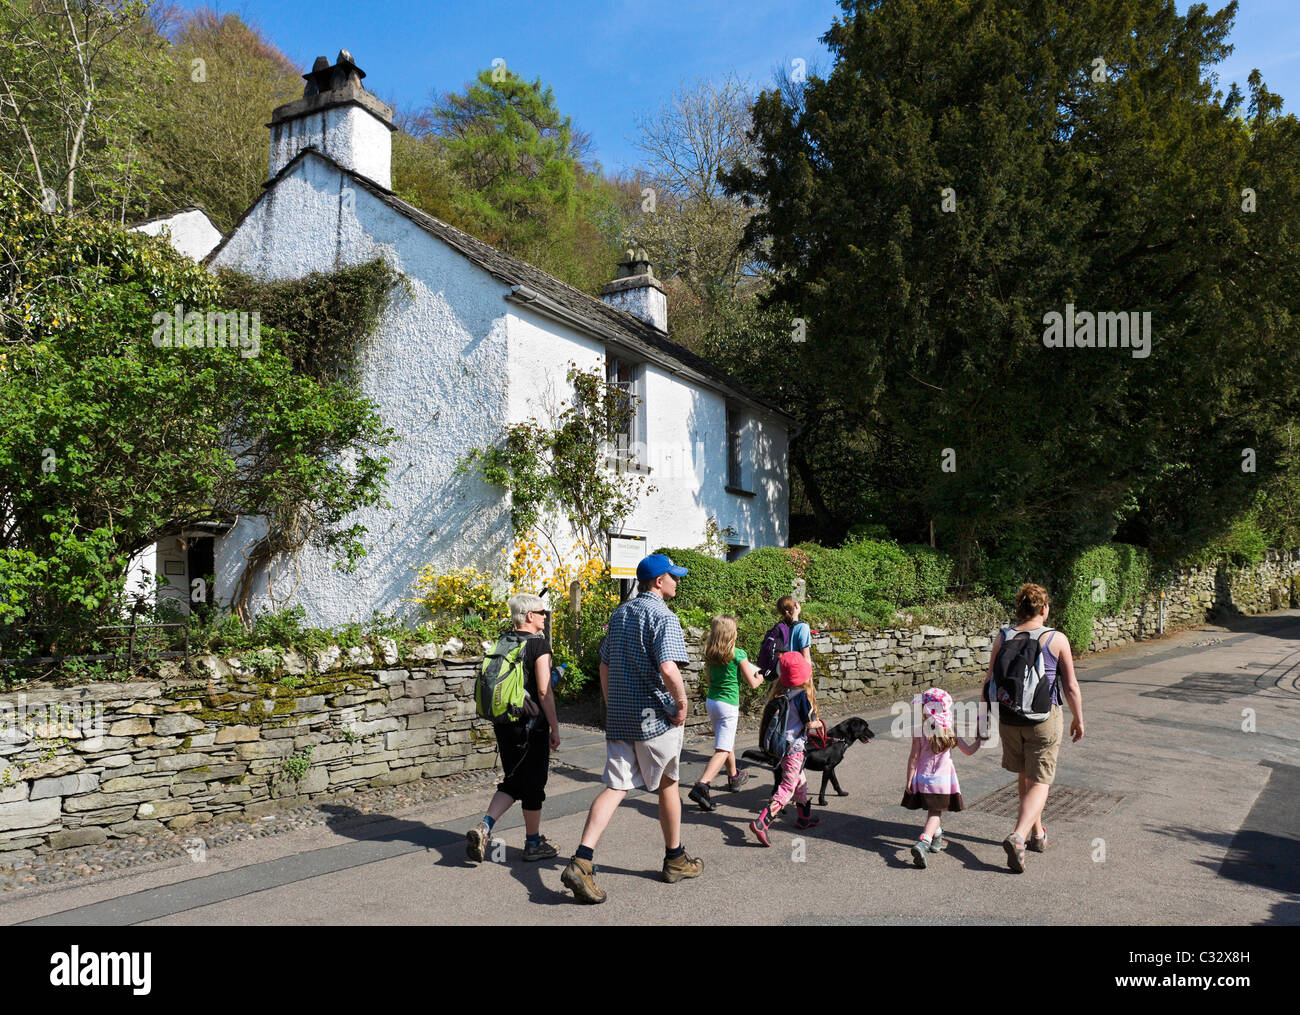 Walkers in front of Dove Cottage (home of William Wordsworth and his sister Dorothy Wordsworth), Grasmere, near Lake Windermere, Lake District, Cumbr Stock Photo